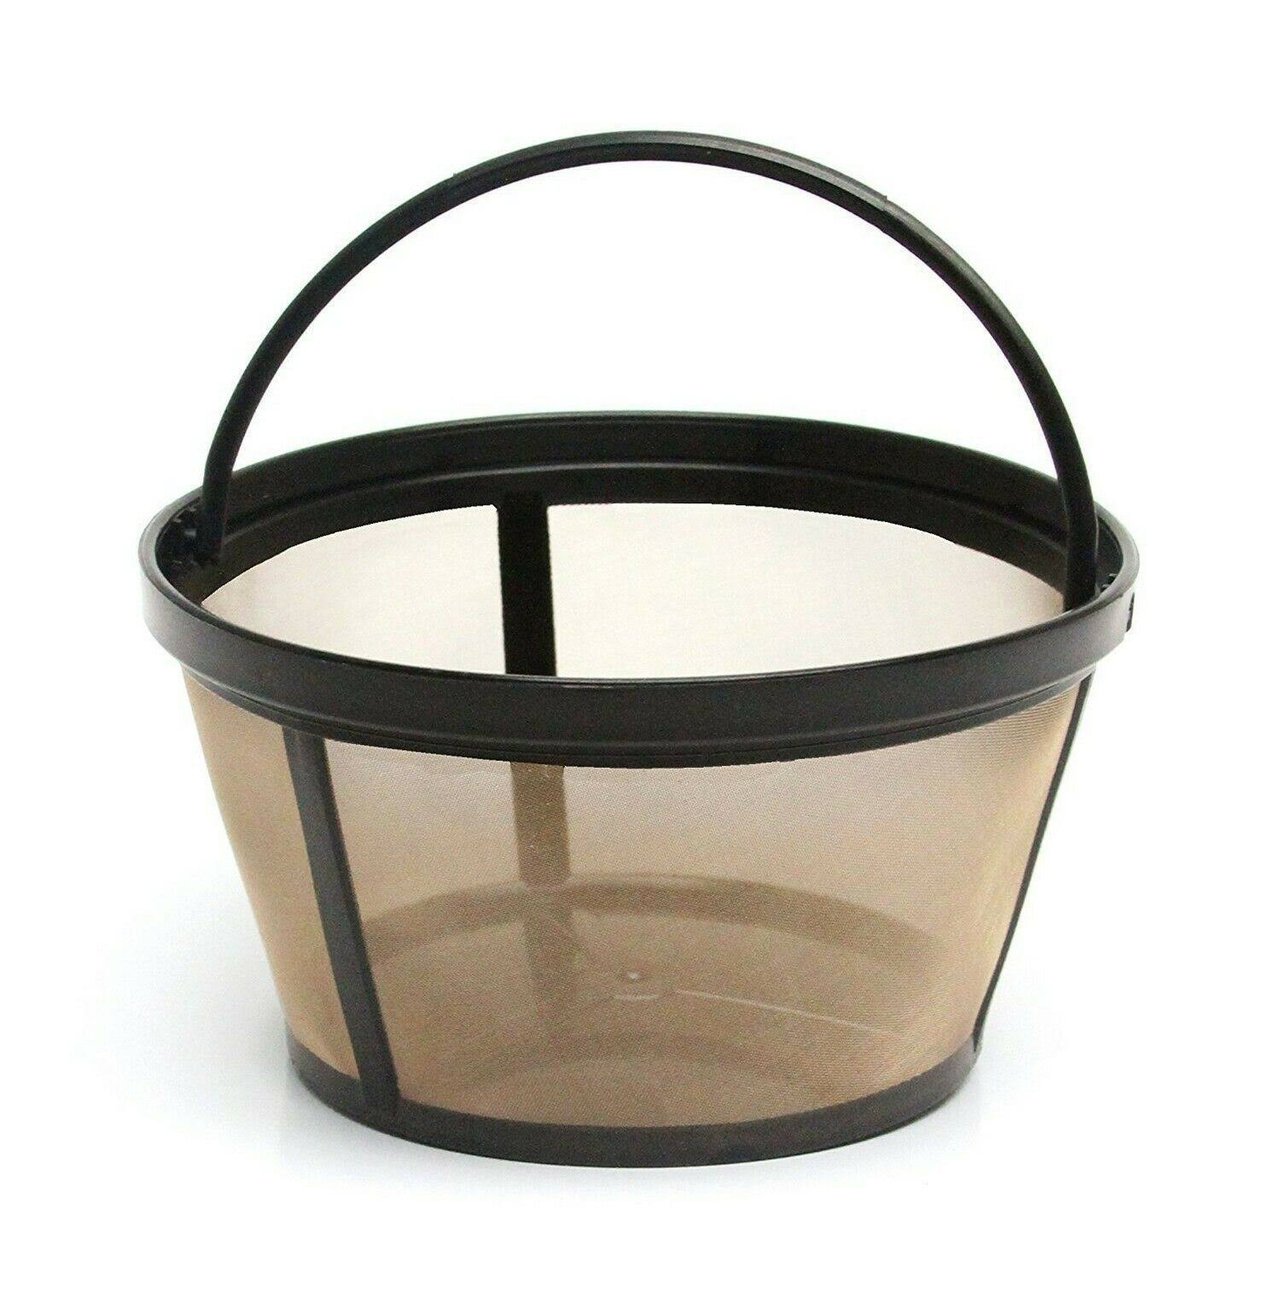 1 Durable Metal Coffee Filter for Mr. Coffee Makers, BPA-Free